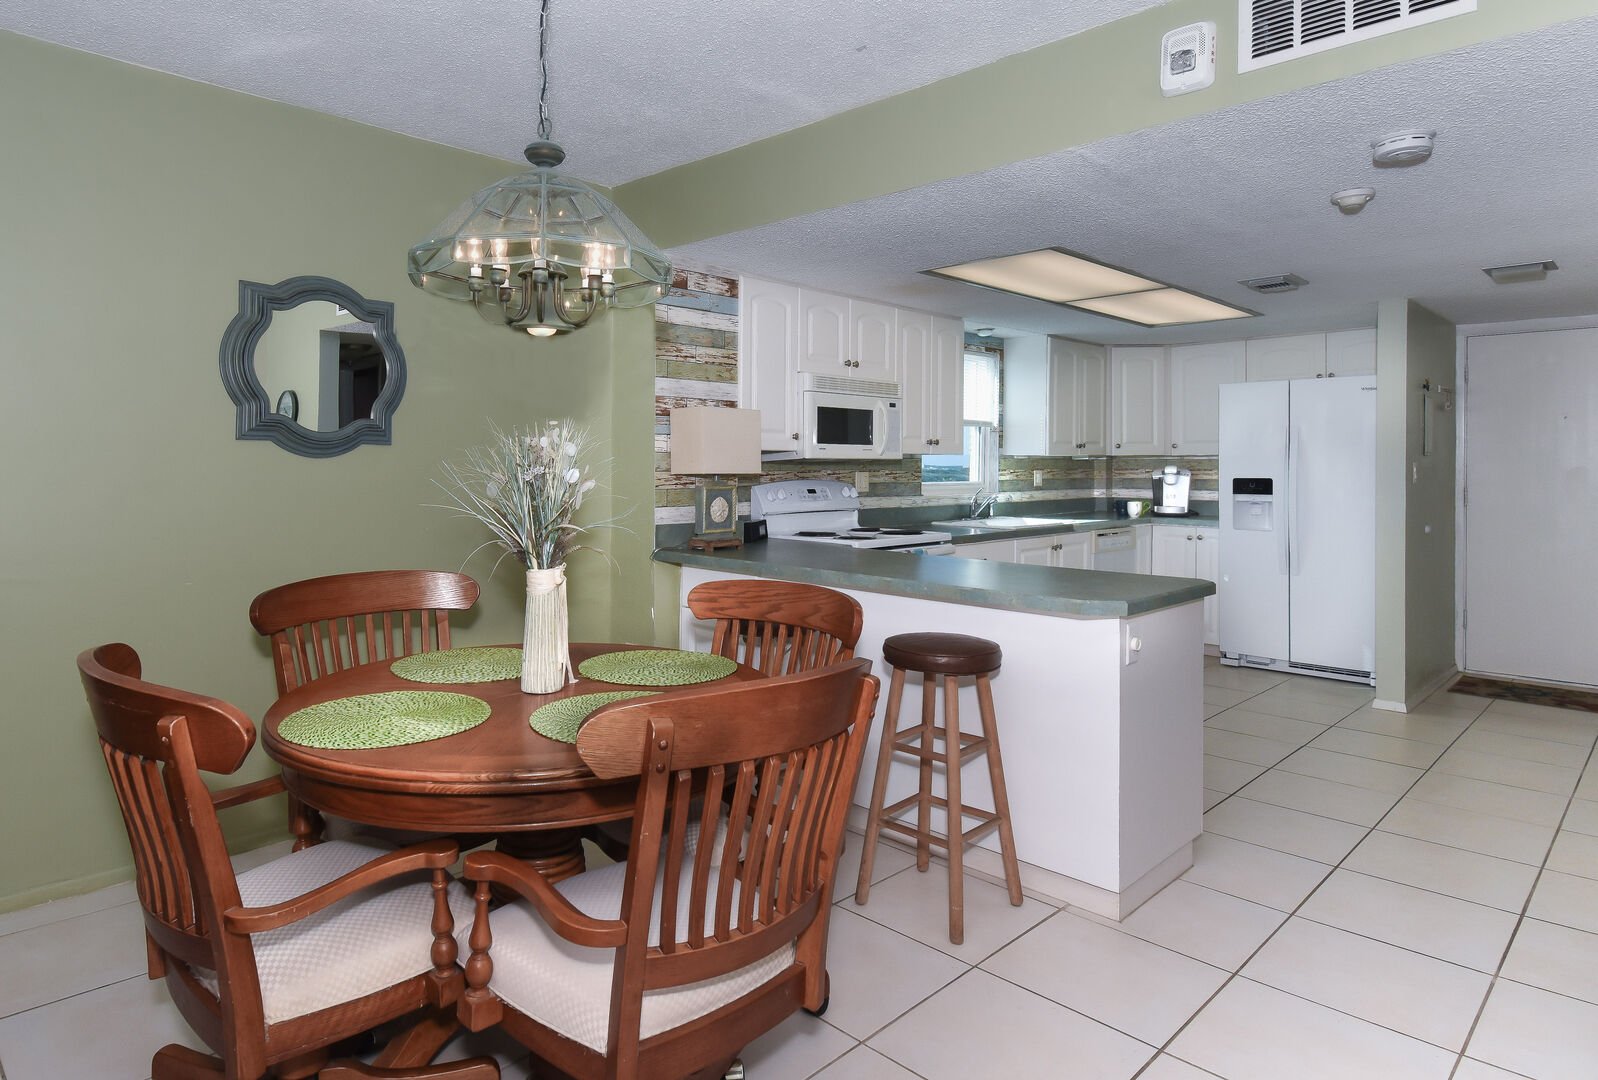 Dining area and kitchen of this private condo in New Smyrna Beach.